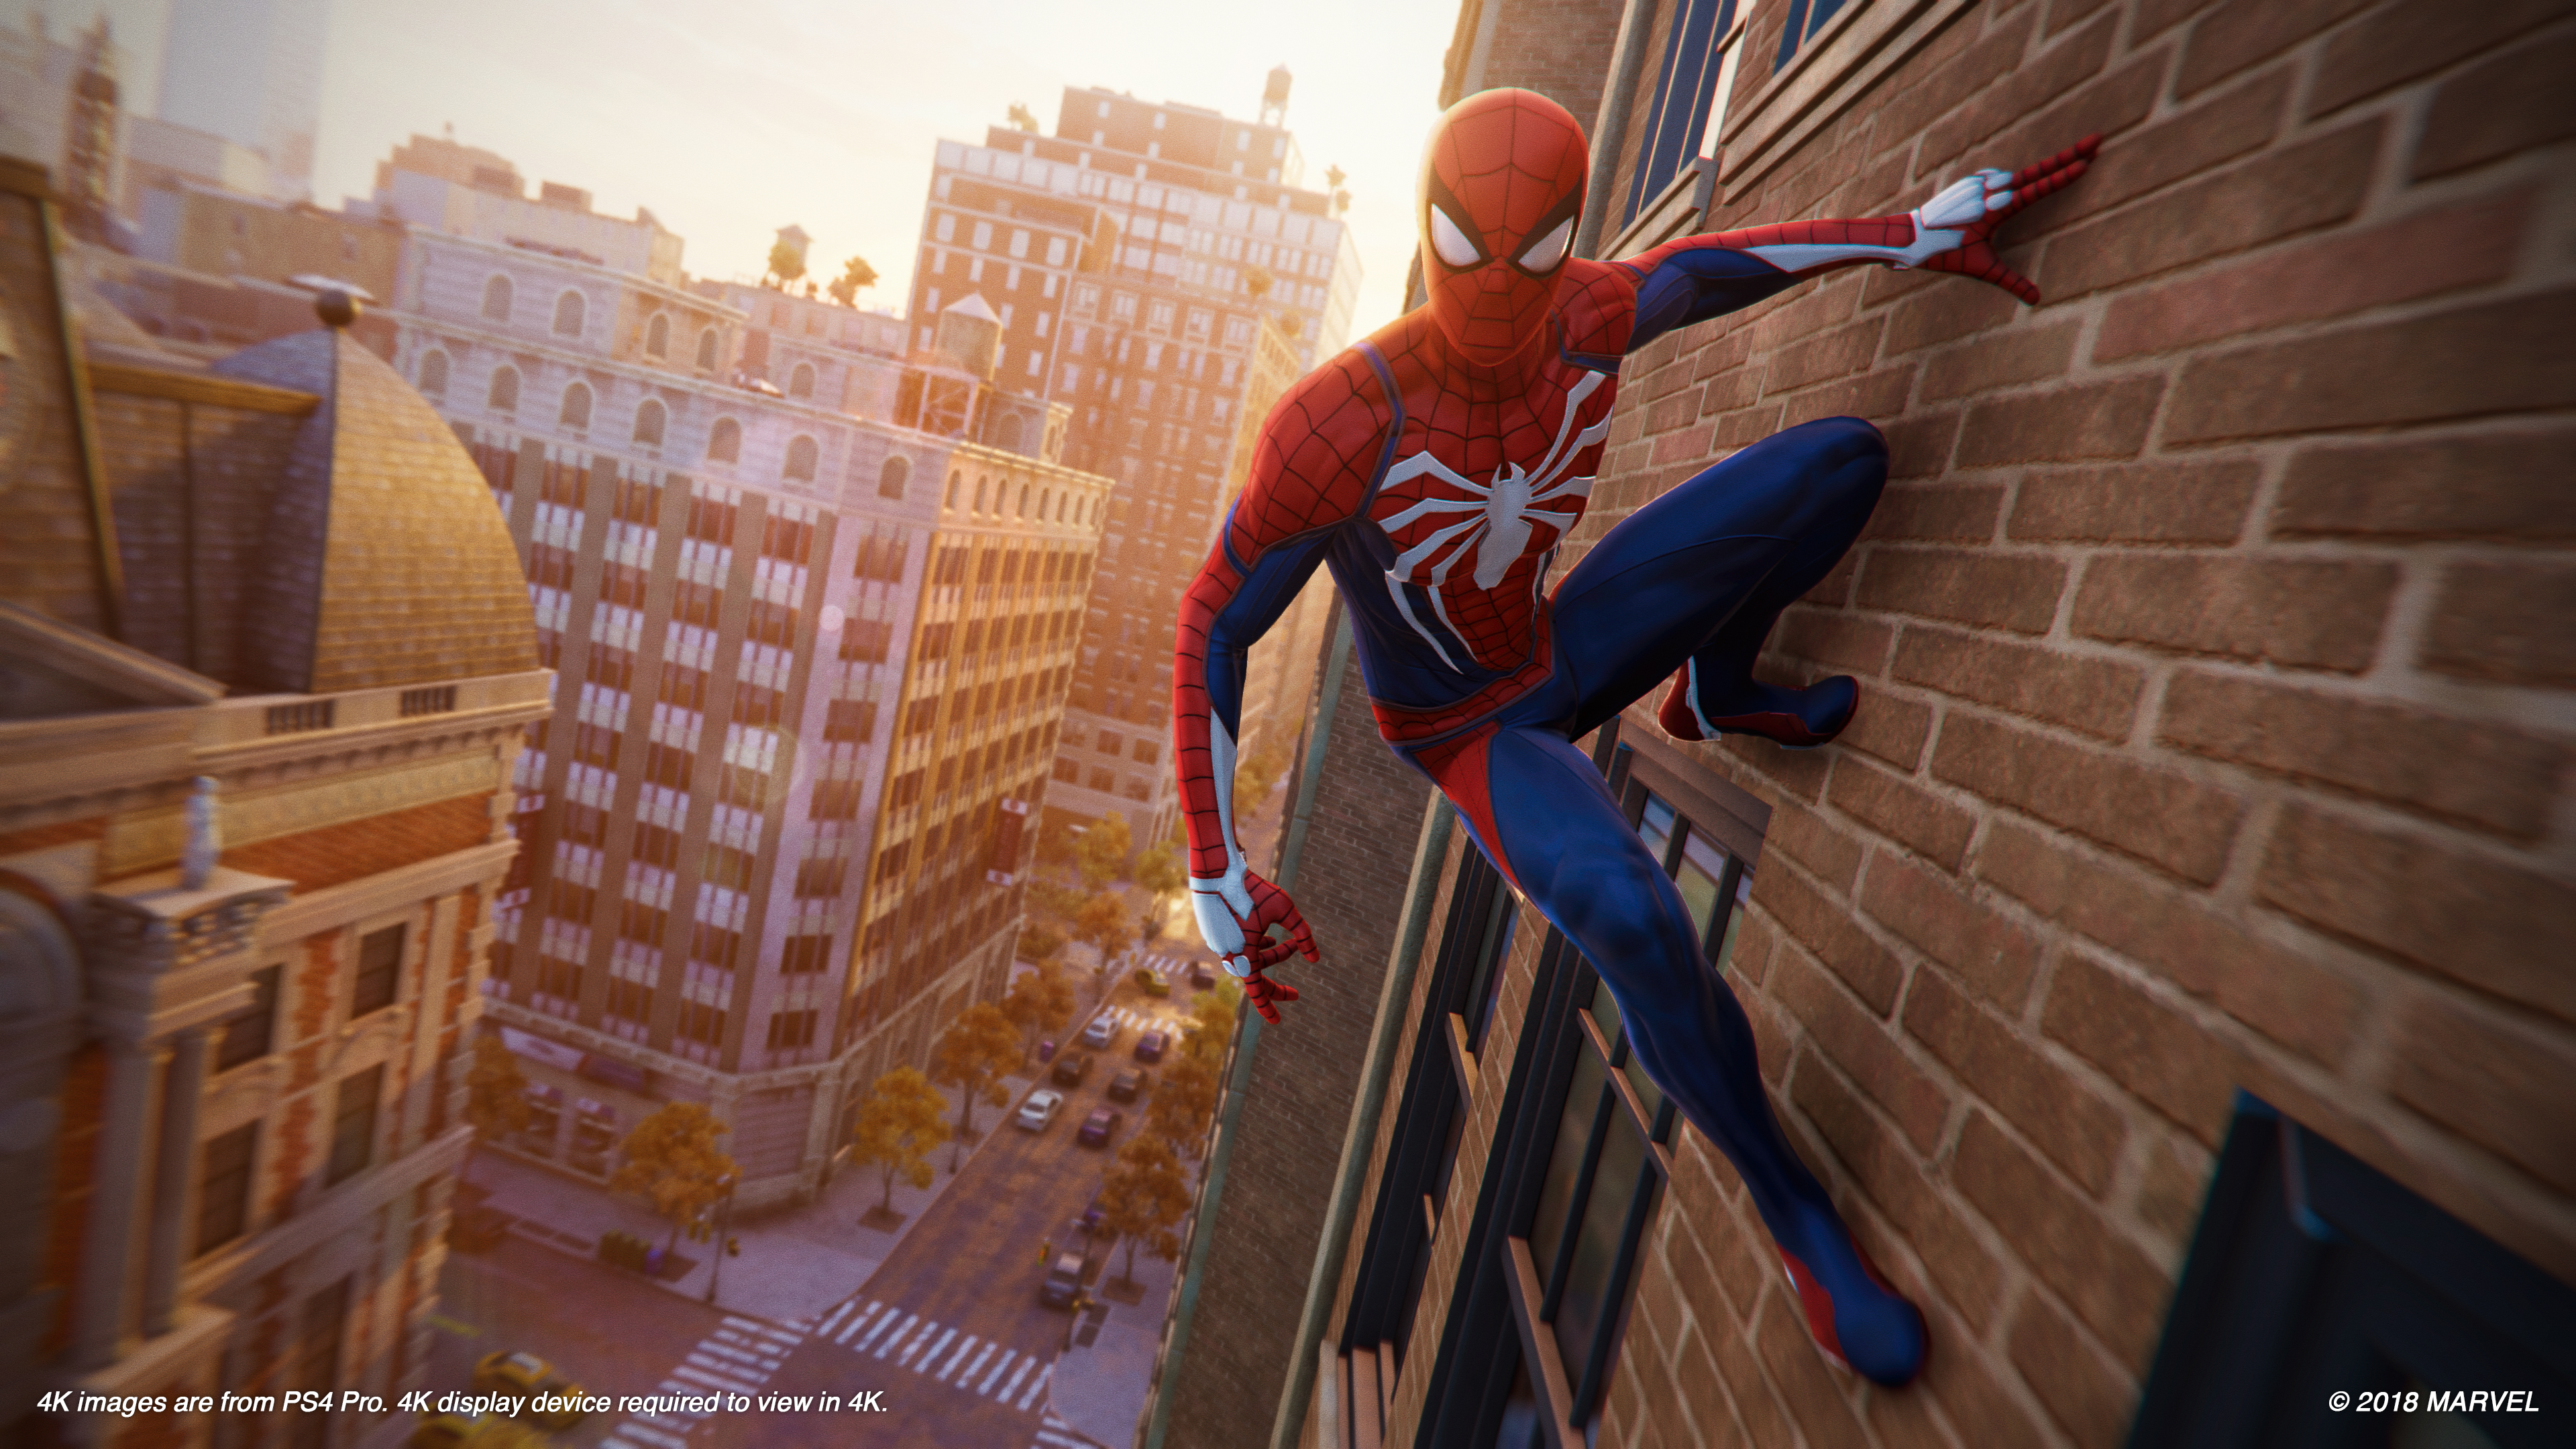 This week’s best gaming deals: Spider-Man, Google Pixel 2 XL, and more